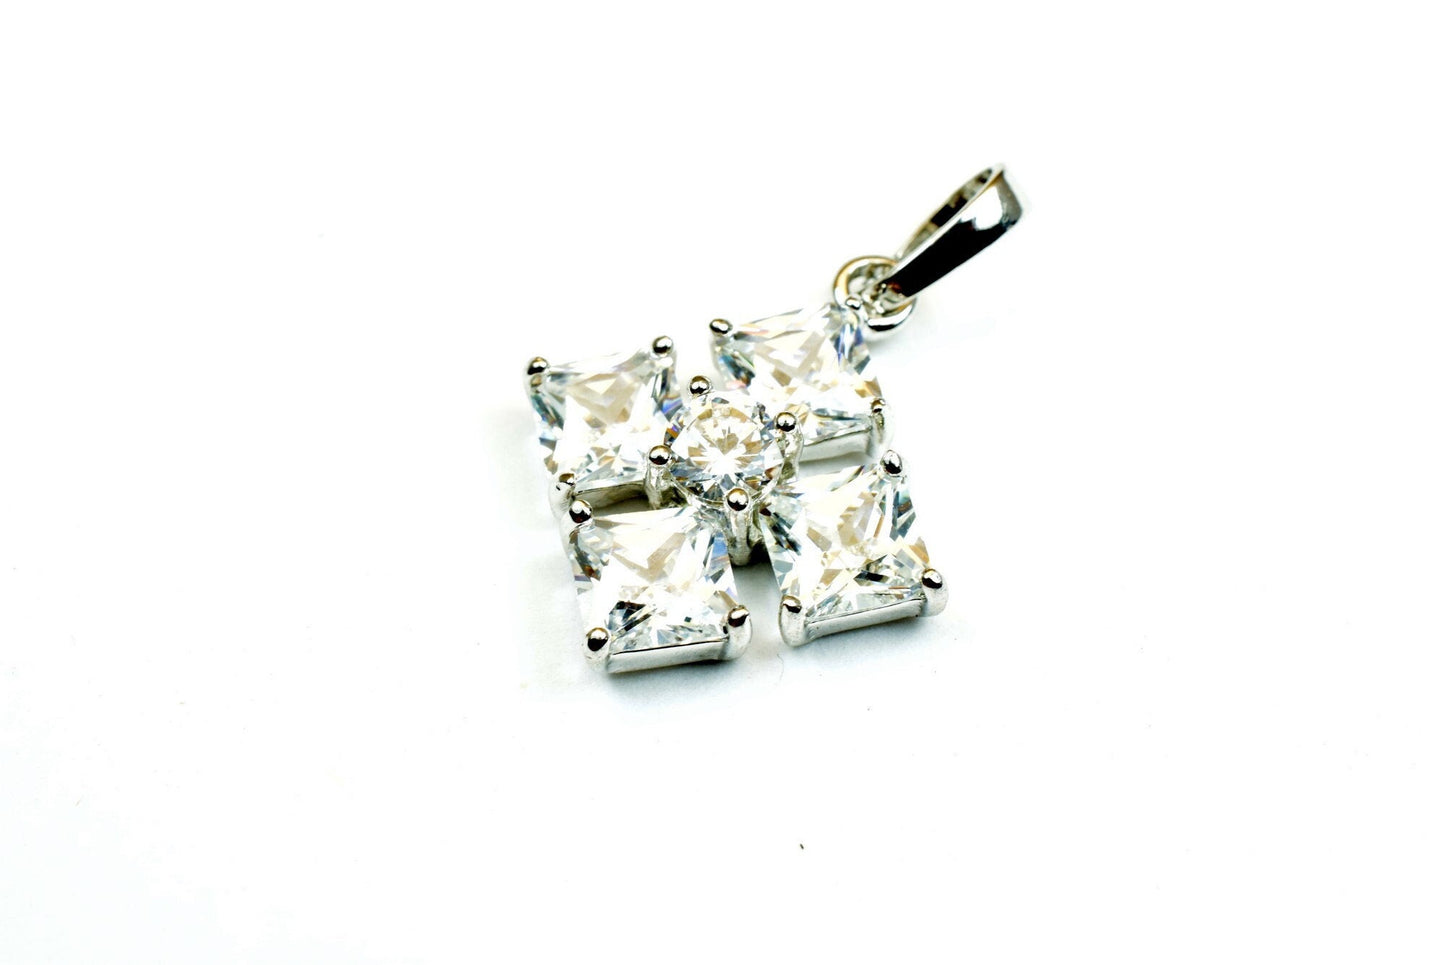 White gold filled cross pendant clear cz cubic zircon rhinestone rhodium plated charm size 19x16mm thickness 5mm findings for jewelry making